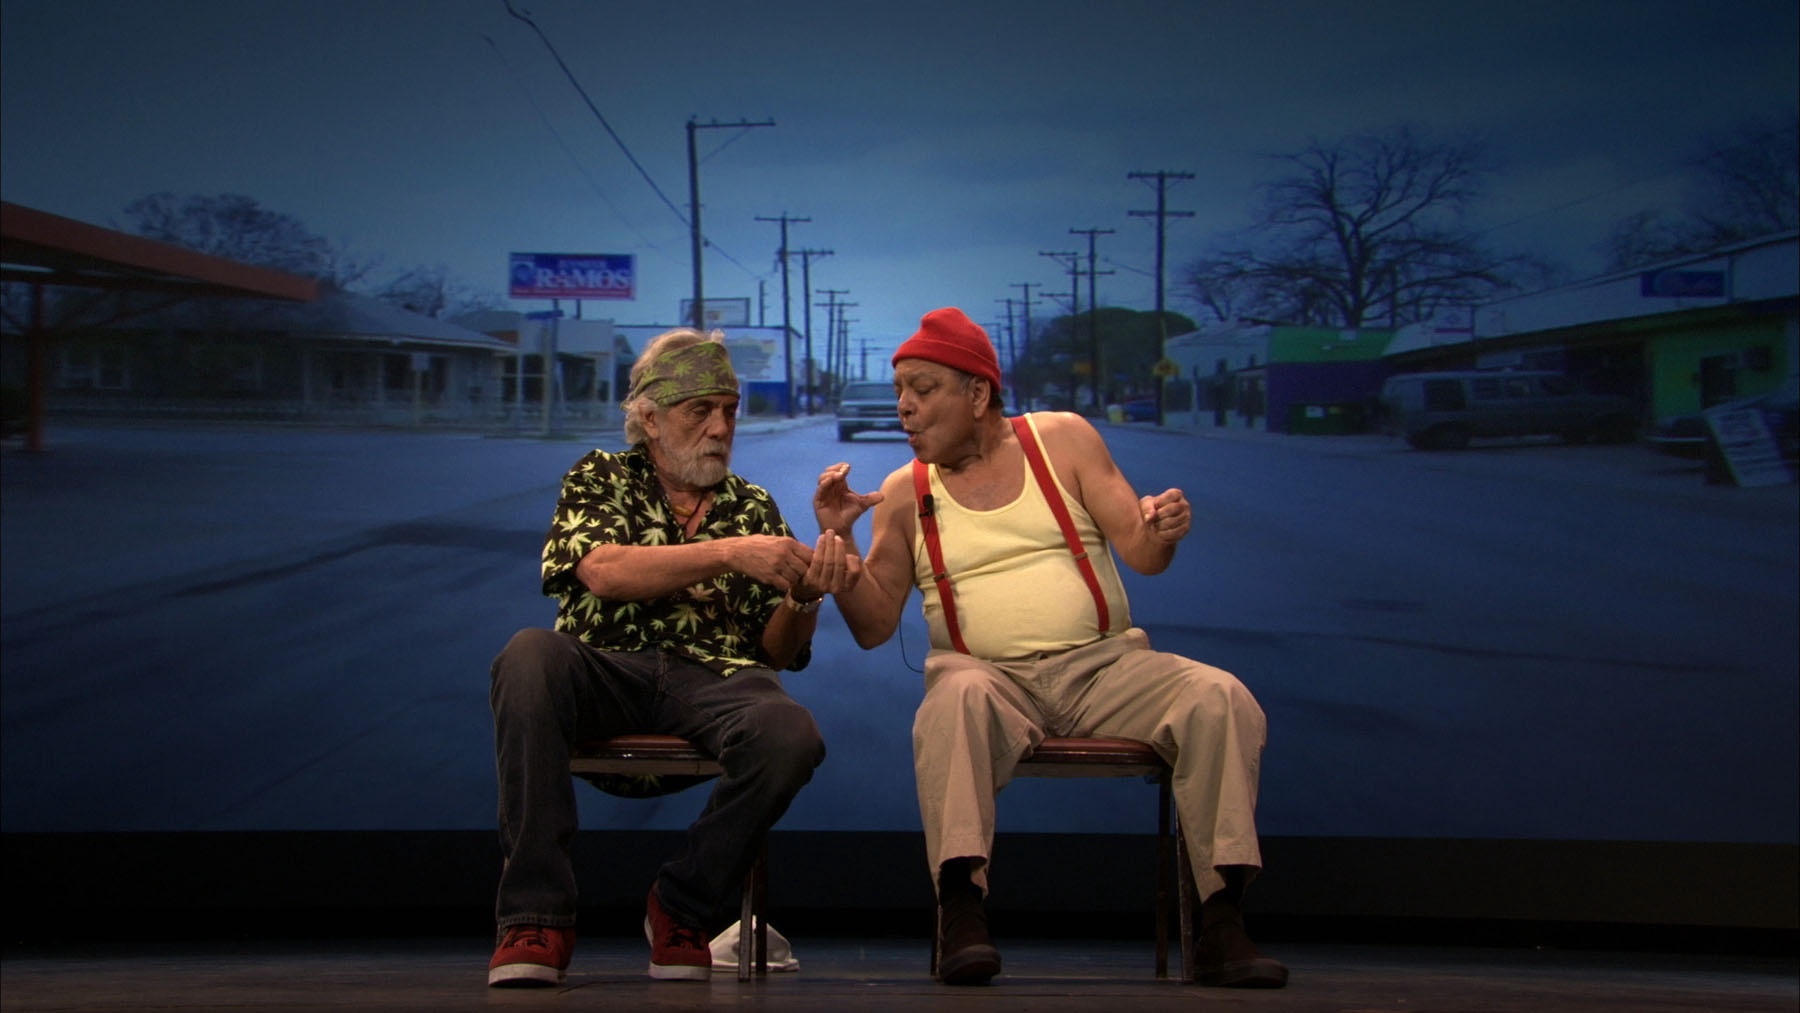 Still of Tommy Chong and Cheech Marin in Hey Watch This (2010)